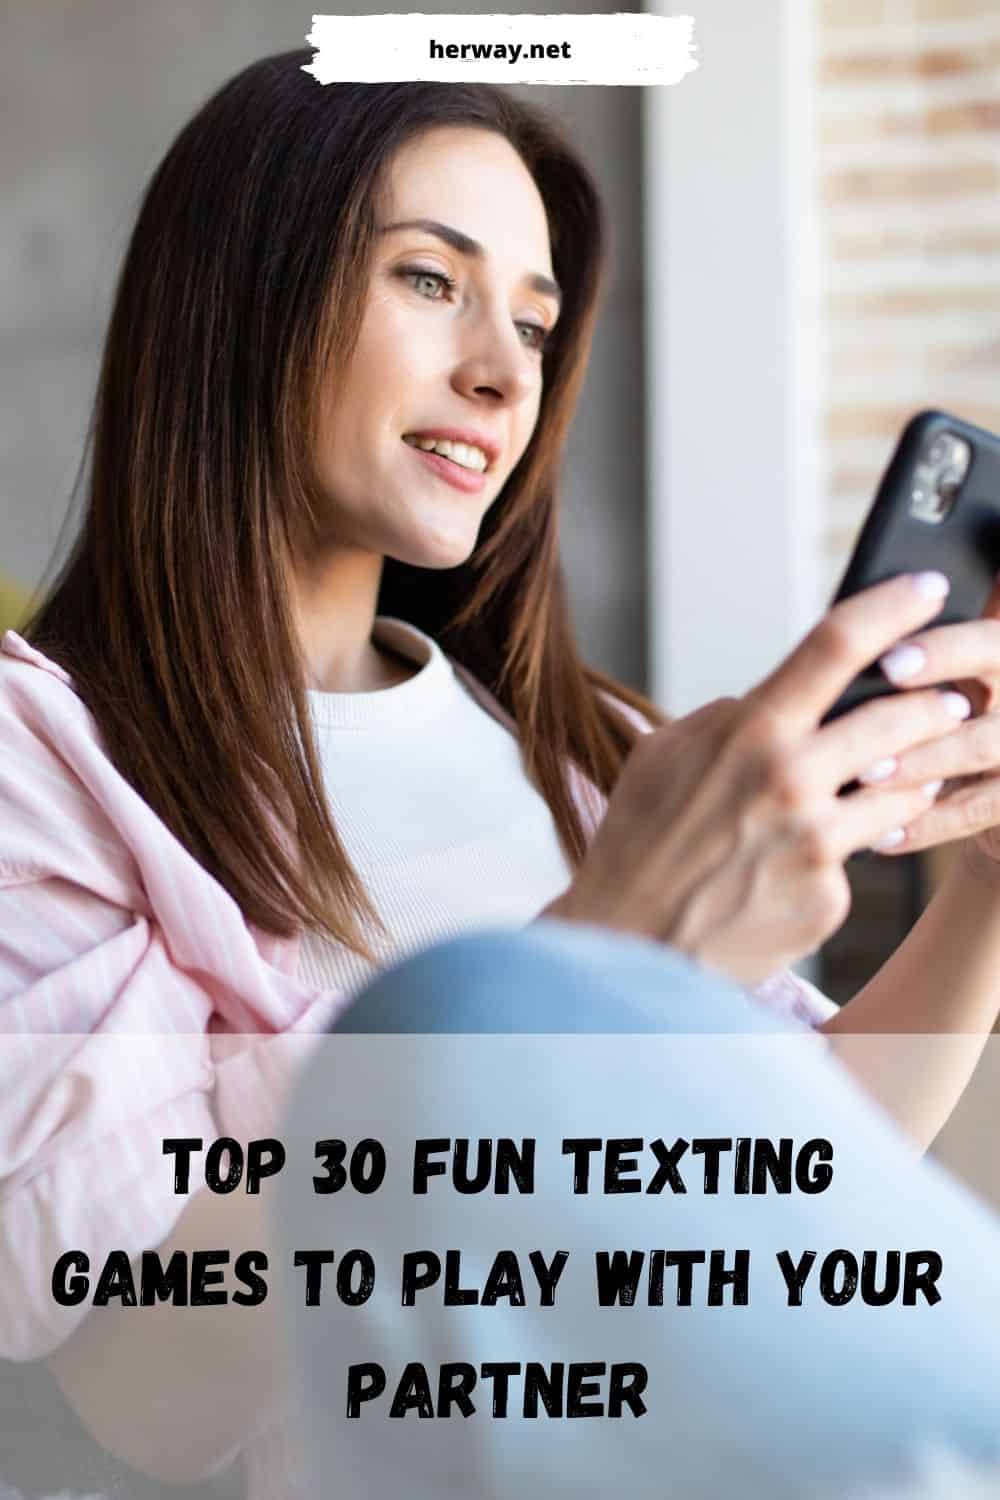 Top 30 Fun Texting Games To Play With Your Partner